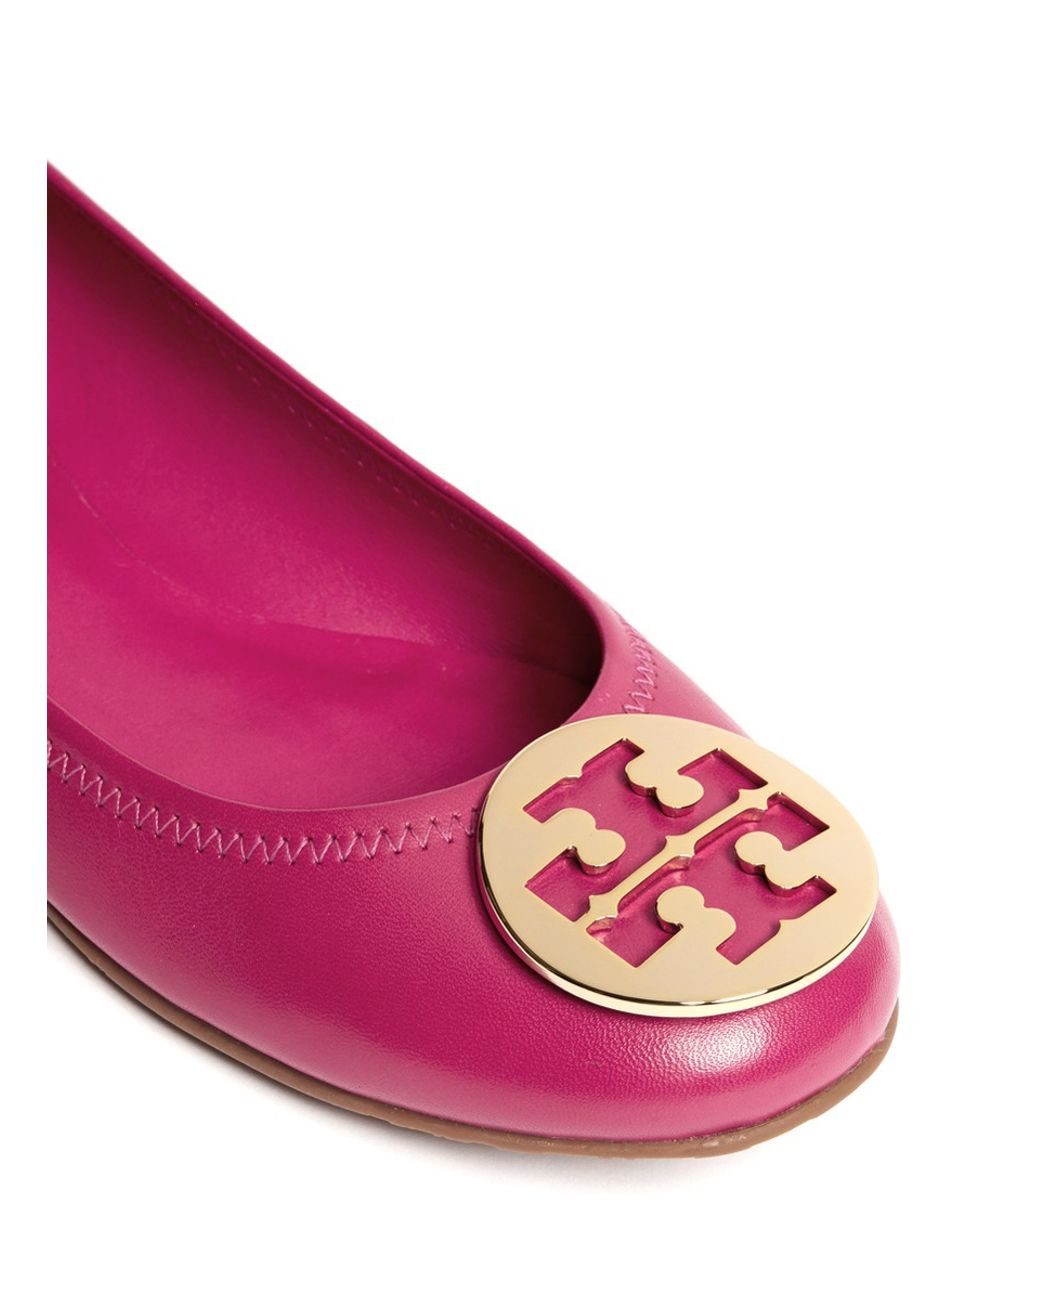 Tory Burch Reva Leather Ballet Flats in Pink | Lyst